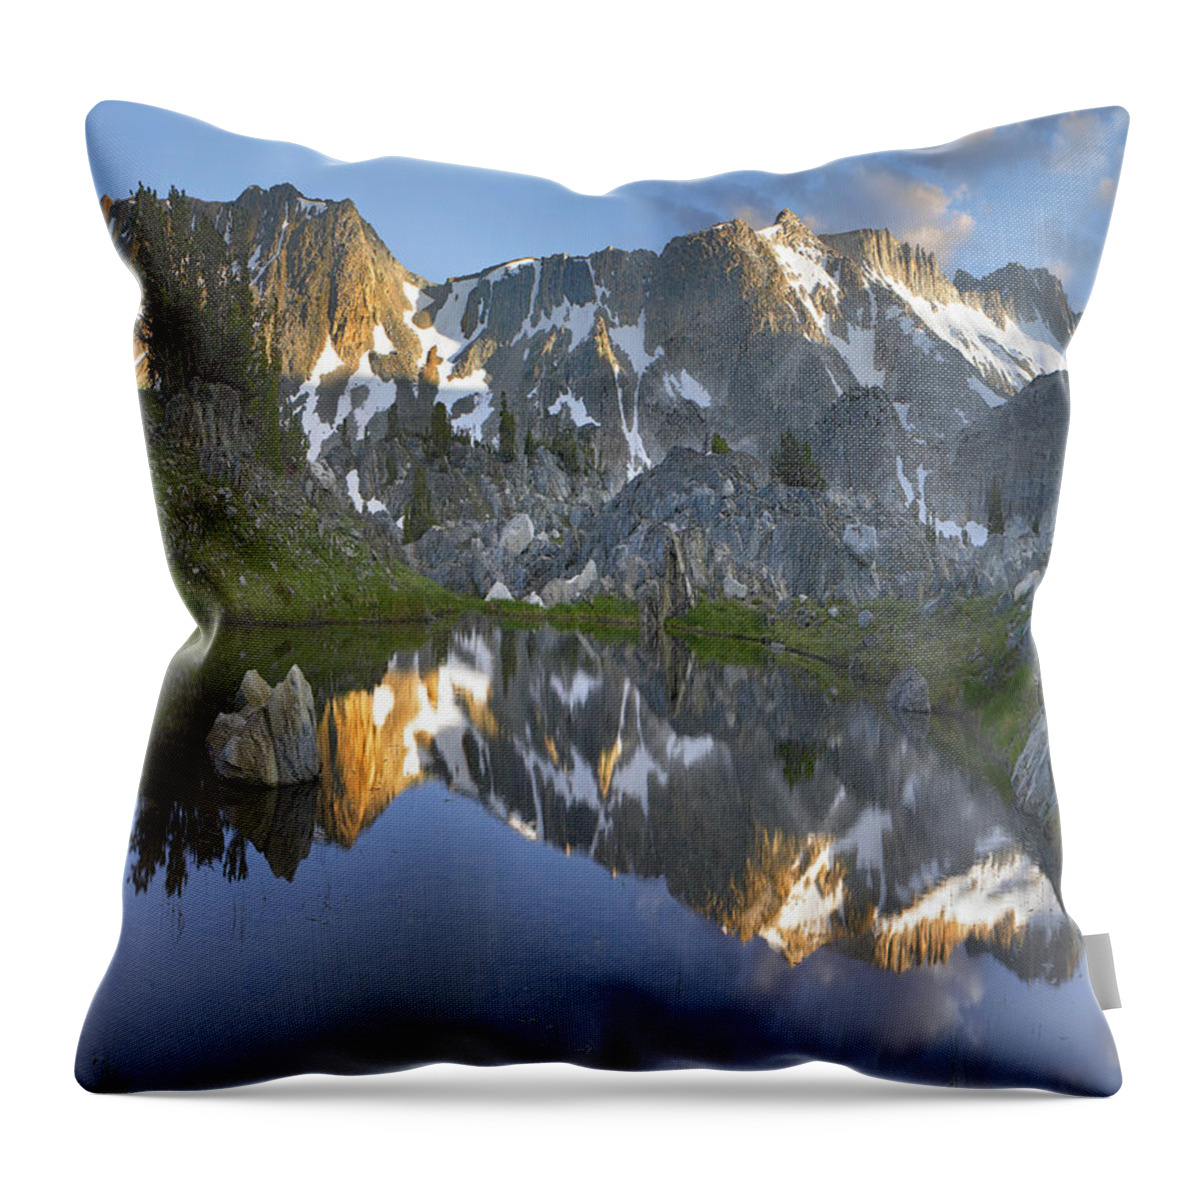 00486953 Throw Pillow featuring the photograph Reflections In Wasco Lake Twenty Lakes by Tim Fitzharris